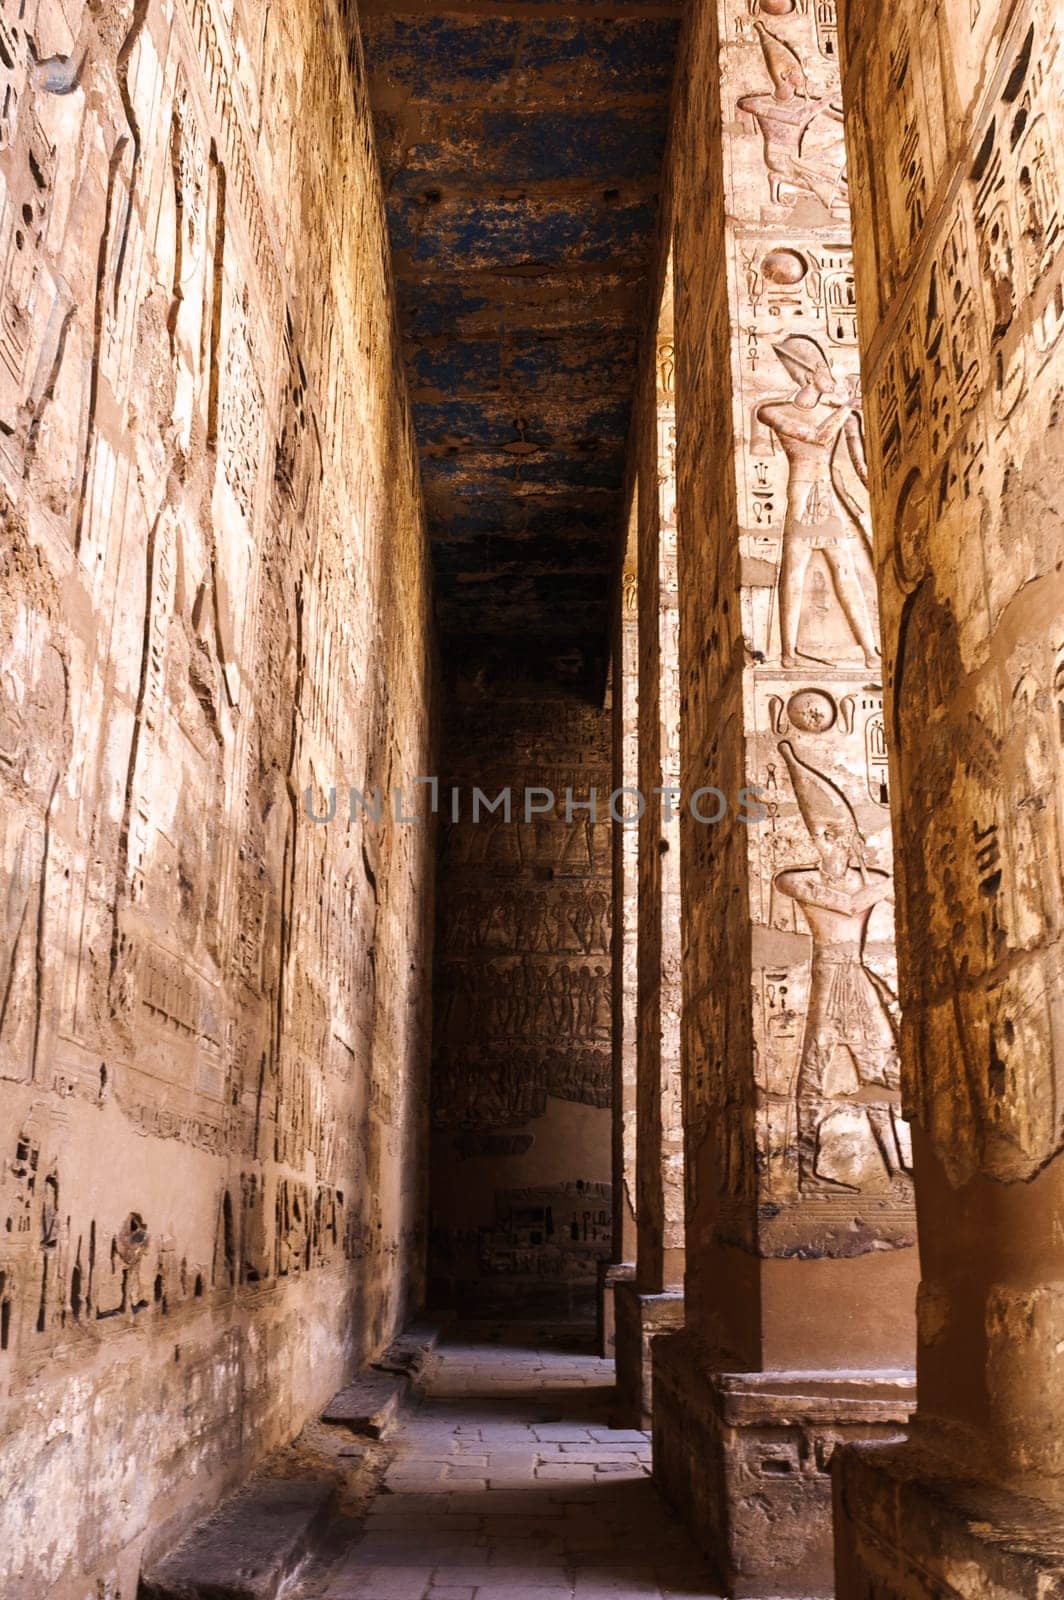 The archaeological site of Medinet Habu by Giamplume